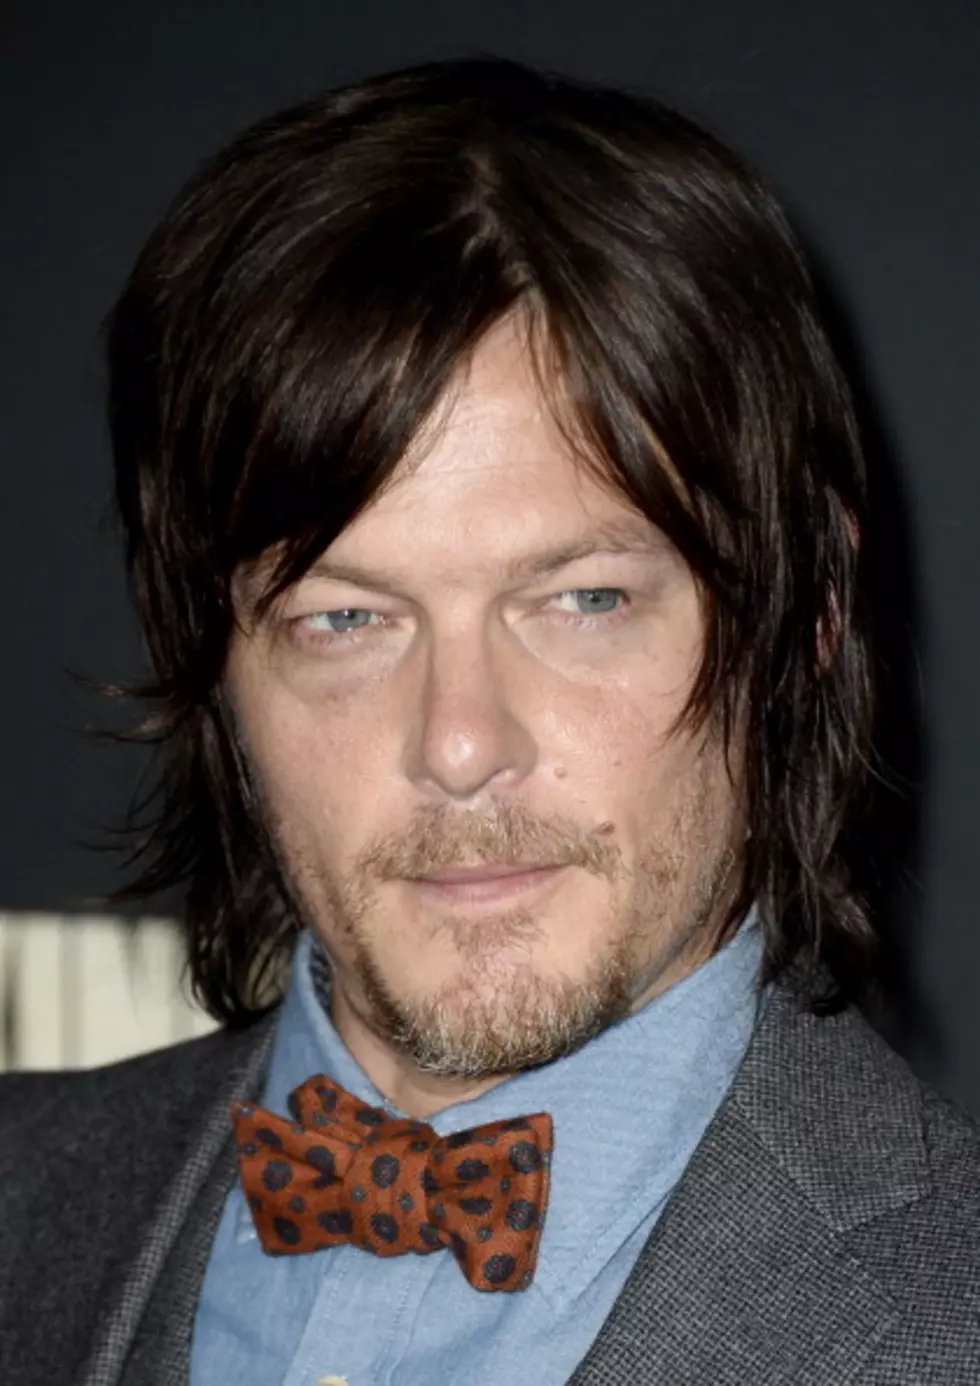 See the Cast Of ‘The Walking Dead’ All Cleaned Up